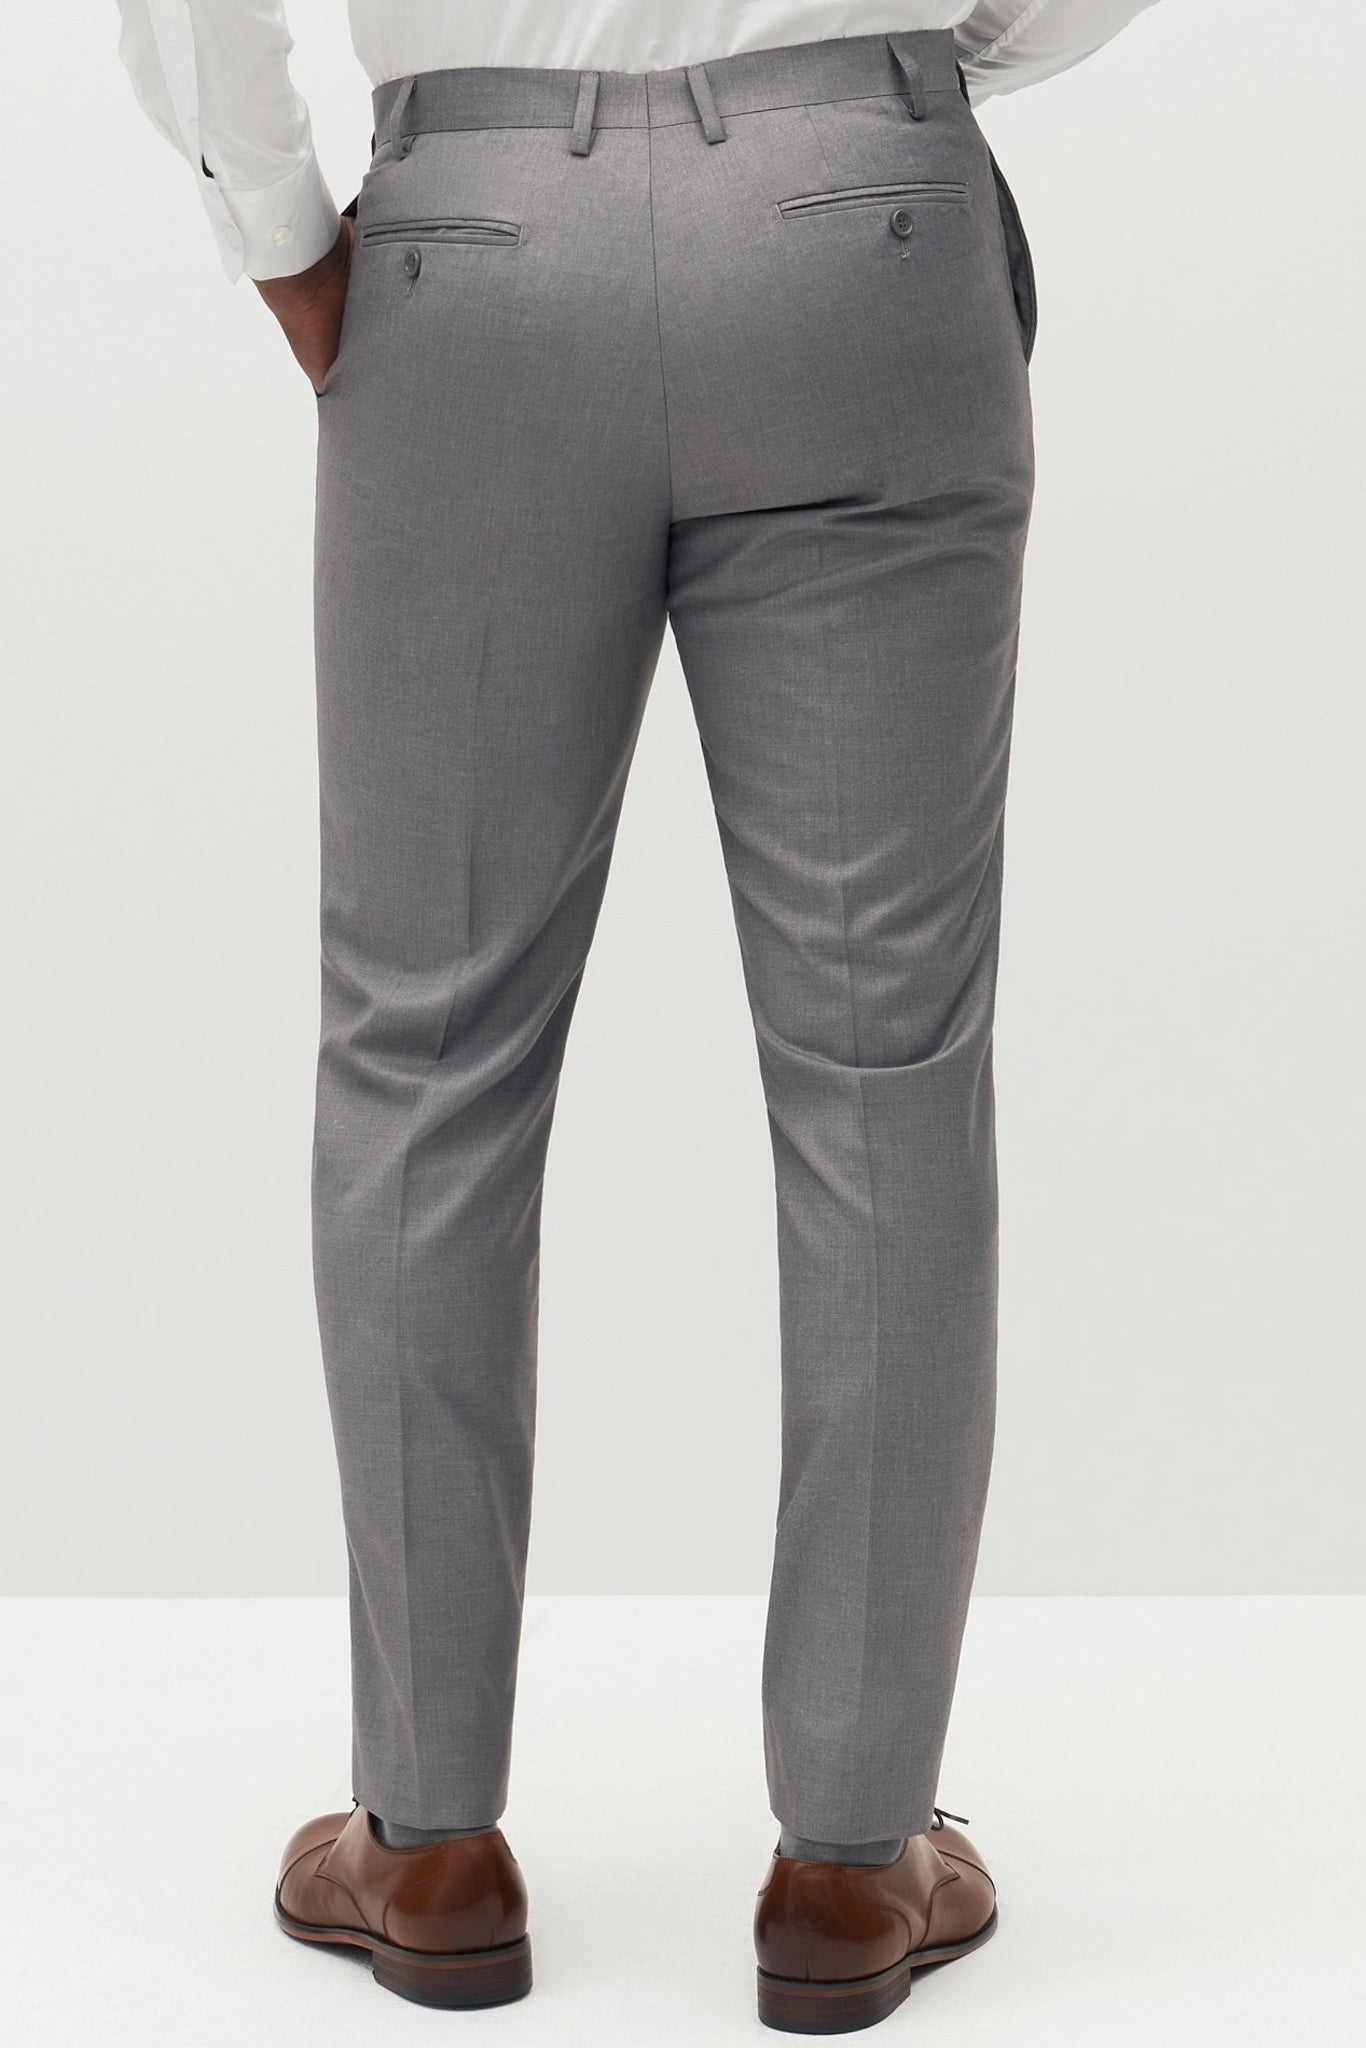 Light Grey Textured Ankle-Length Formal Men Ultra Slim Fit Trousers -  Selling Fast at Pantaloons.com